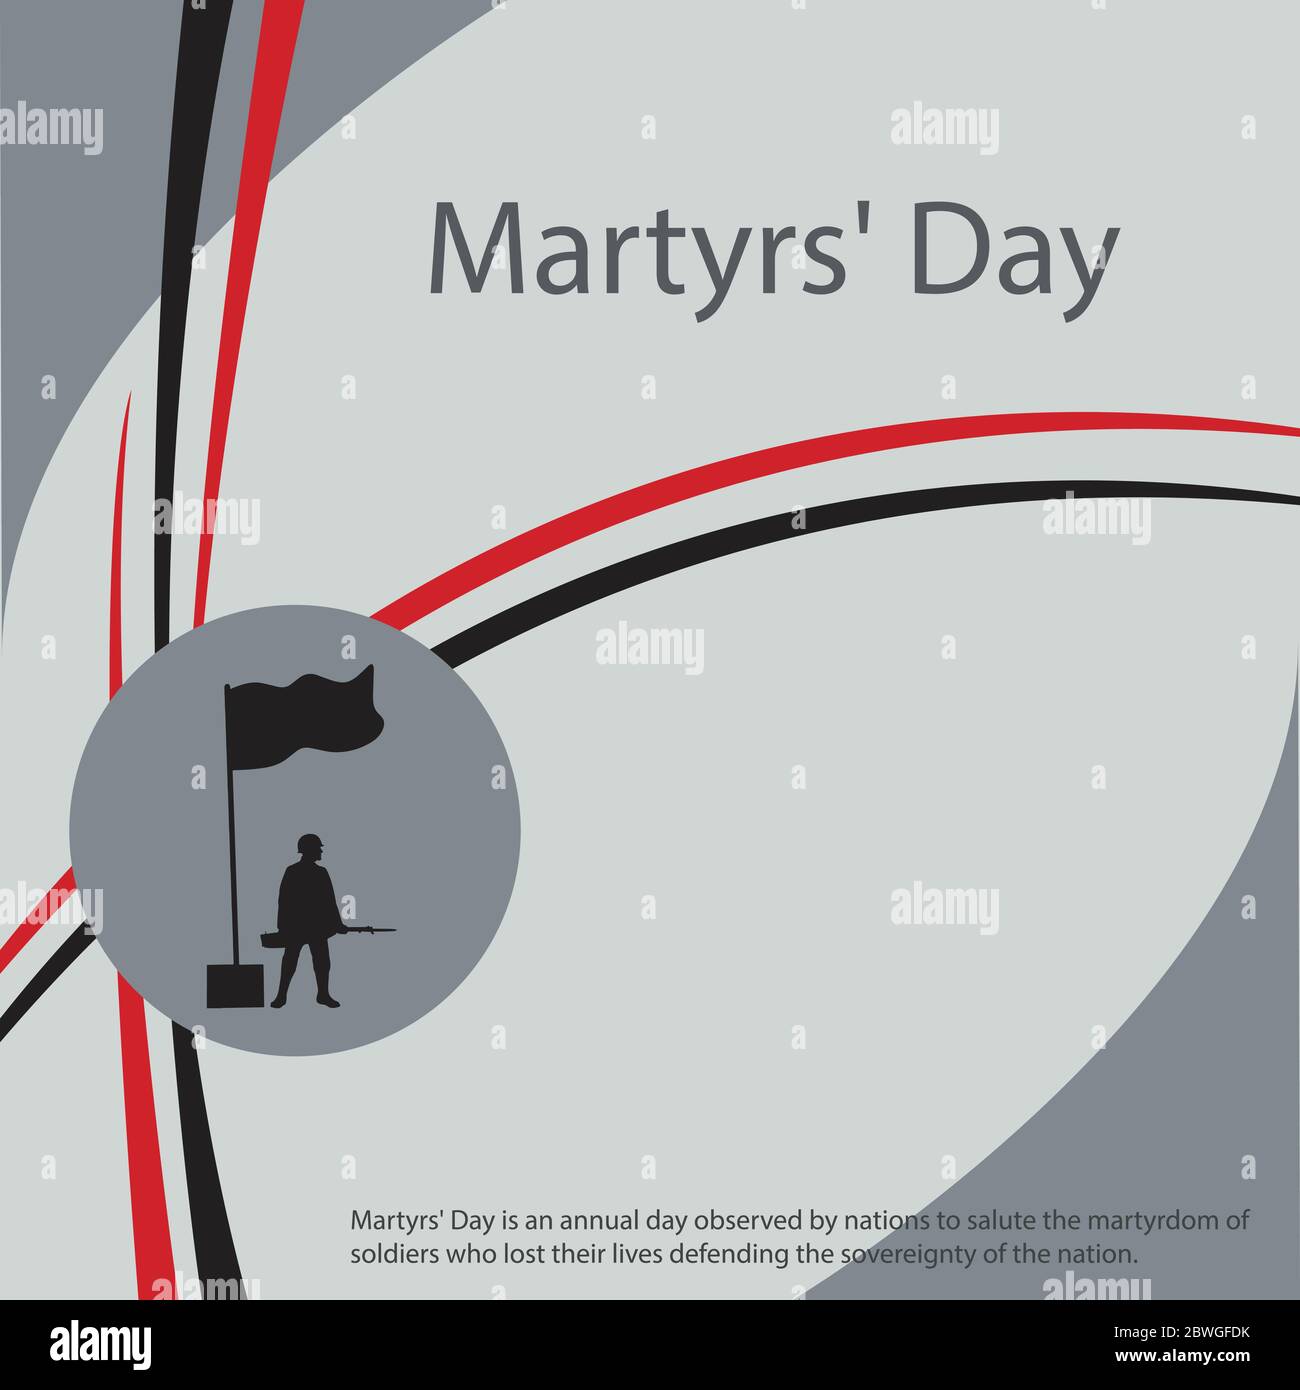 Martyrs' Day is an annual day observed by nations to salute the martyrdom of soldiers who lost their lives defending the sovereignty of the nation. Stock Vector